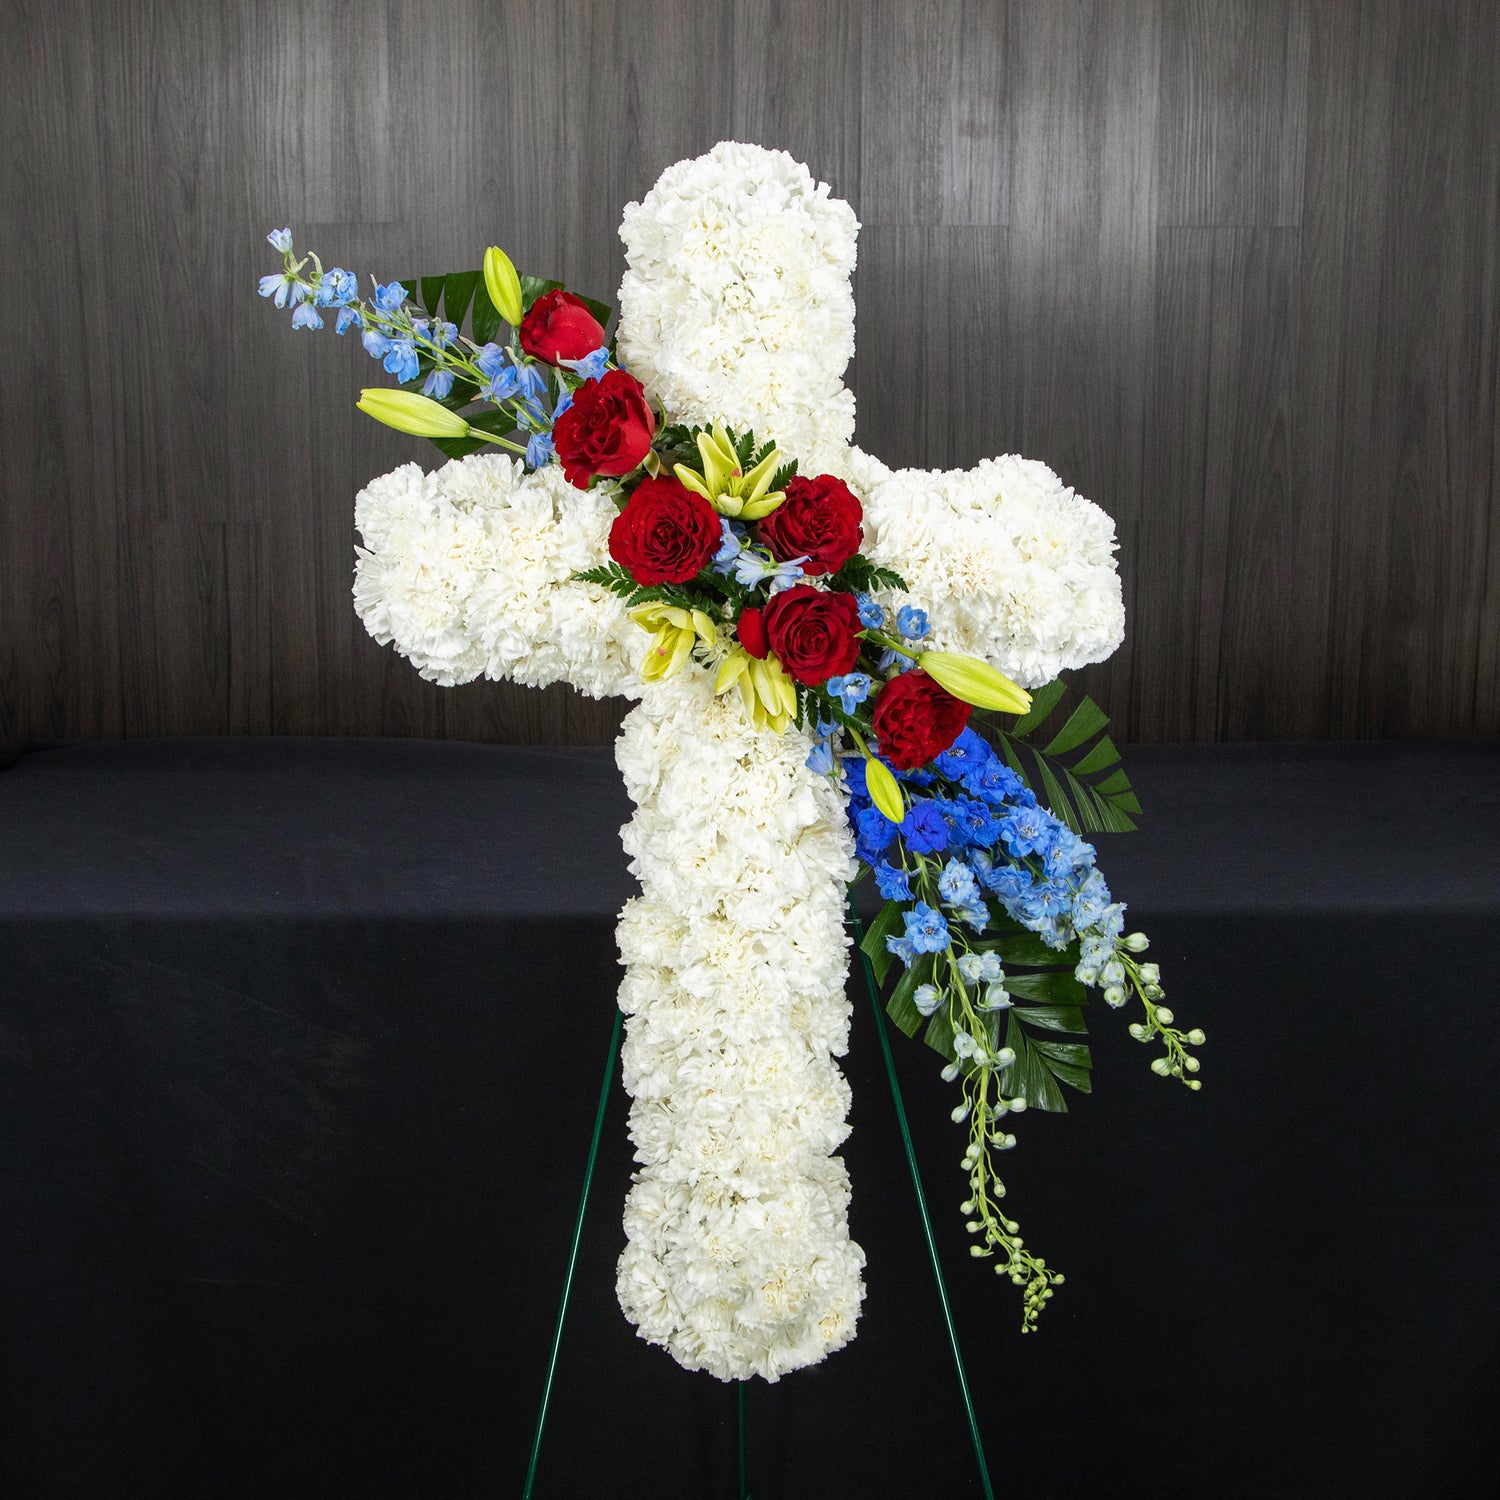 a white floral cross with a belt of red and blue flowers going diagonally across the middle